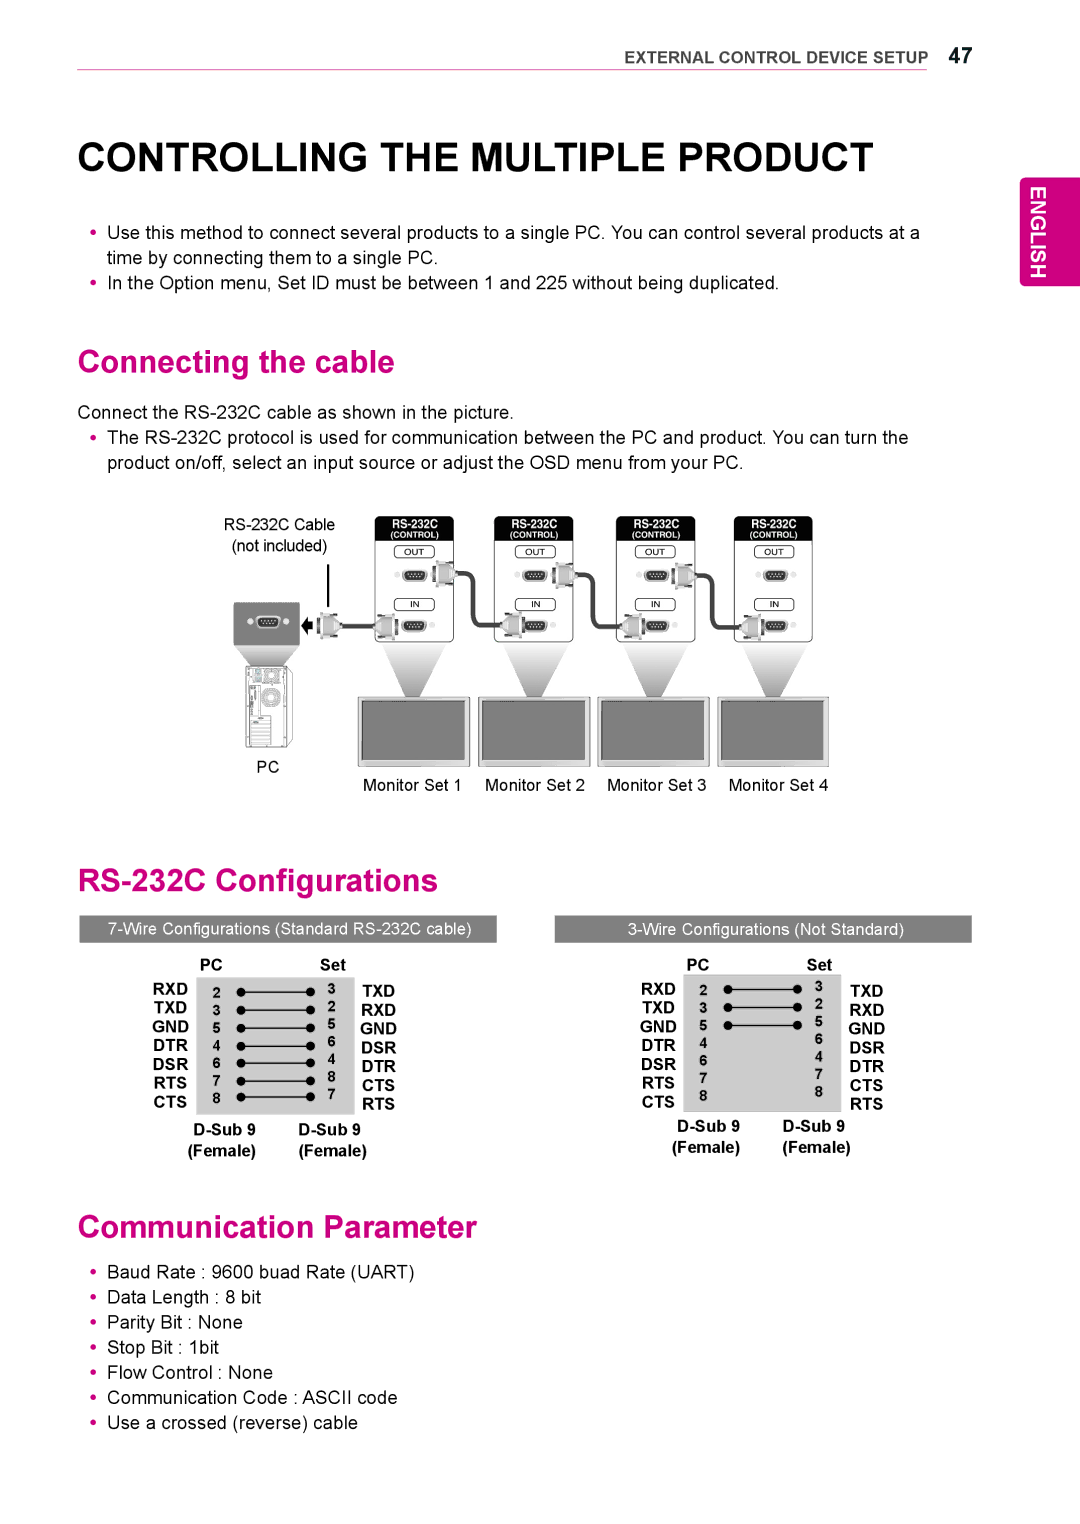 LG Electronics 65VS10 owner manual Controlling the Multiple Product, Connecting the cable, RS-232C Configurations 